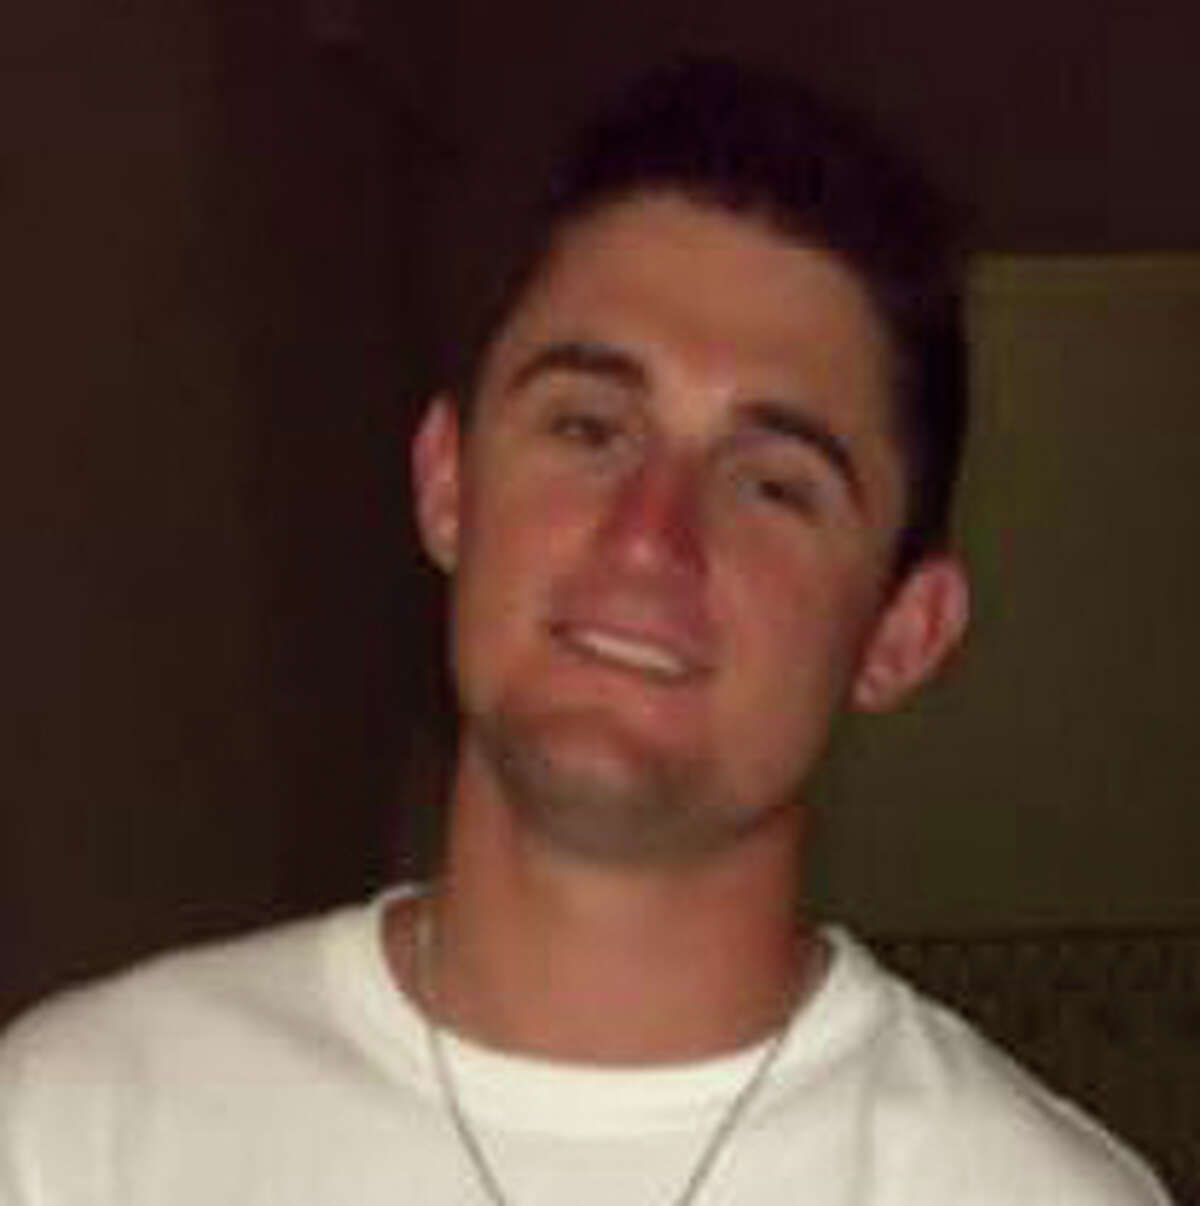 Chaz Logan York, 23, was shot by an off-duty Beaumont officer on the early morning of Oct. 14. 